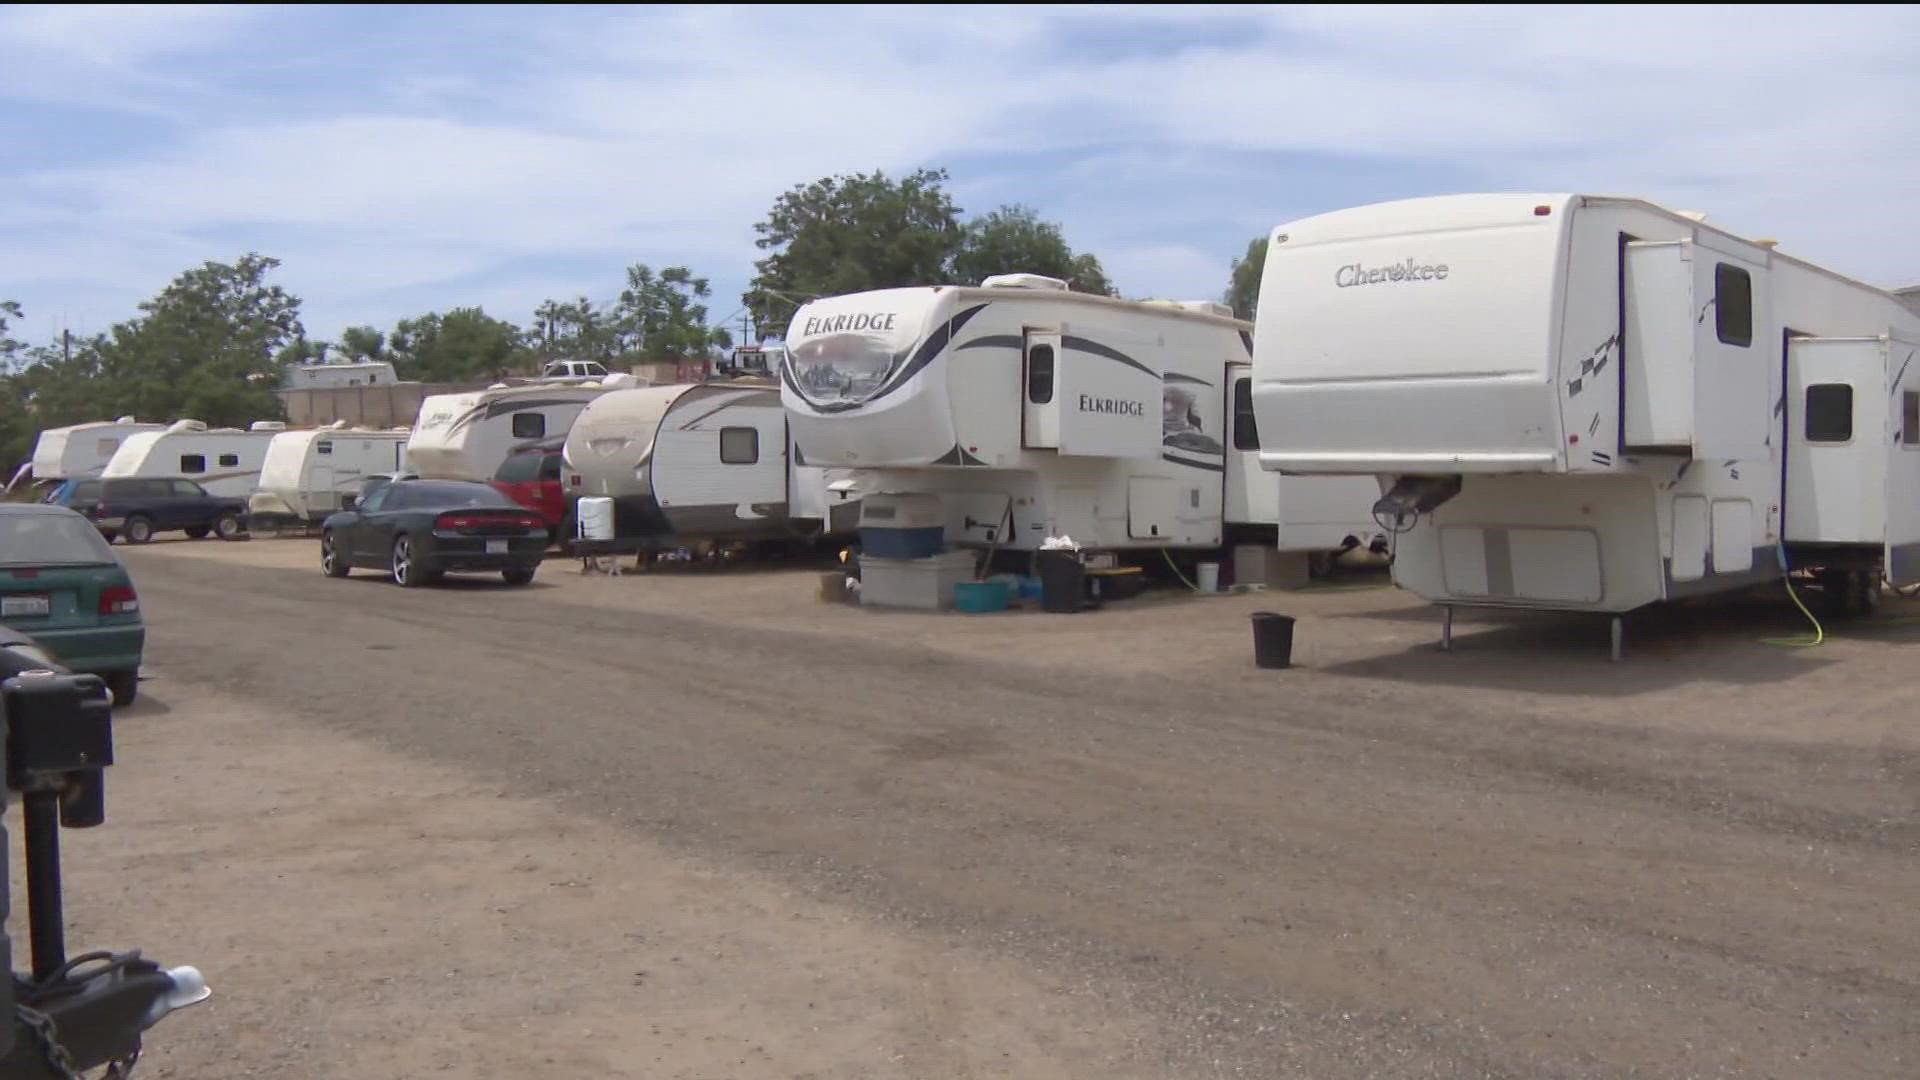 It's illegal for RVs to park during the overnight hours on public streets. The safe parking lots give people a place to park at night.